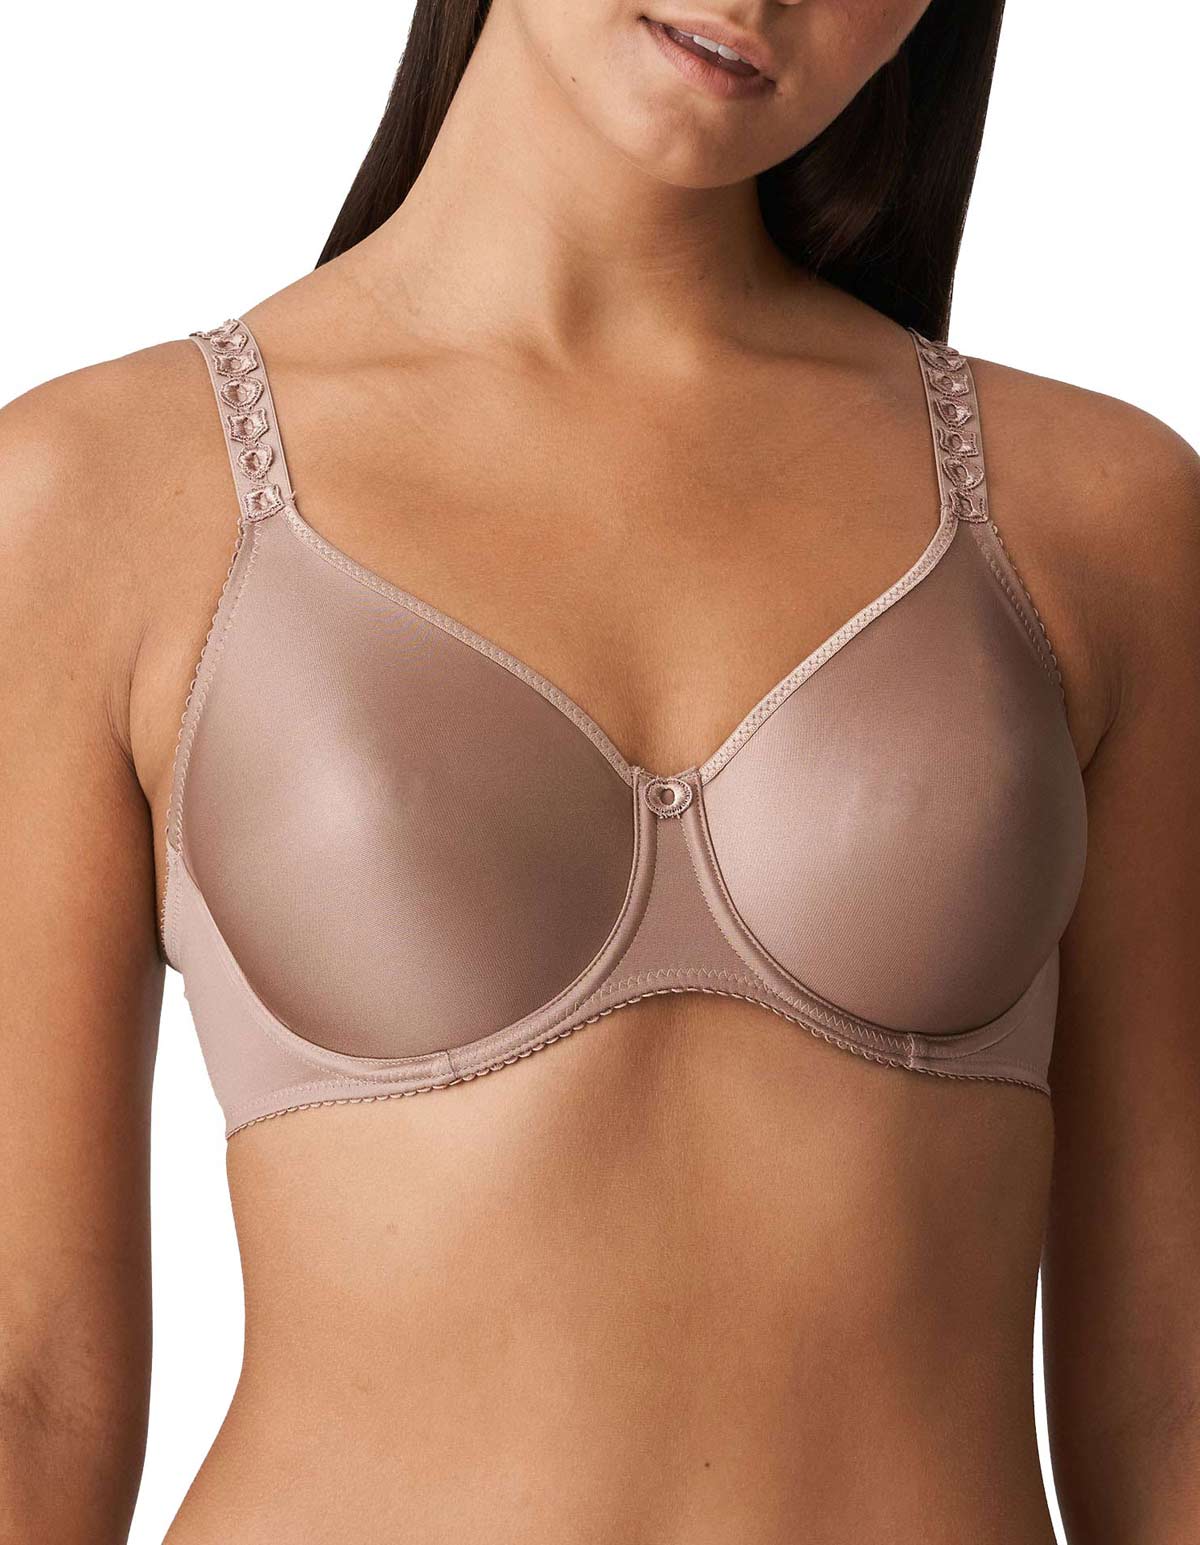 PrimaDonna Every Woman 0163110-GIN Ginger Non-Padded Underwired Full Cup Bra